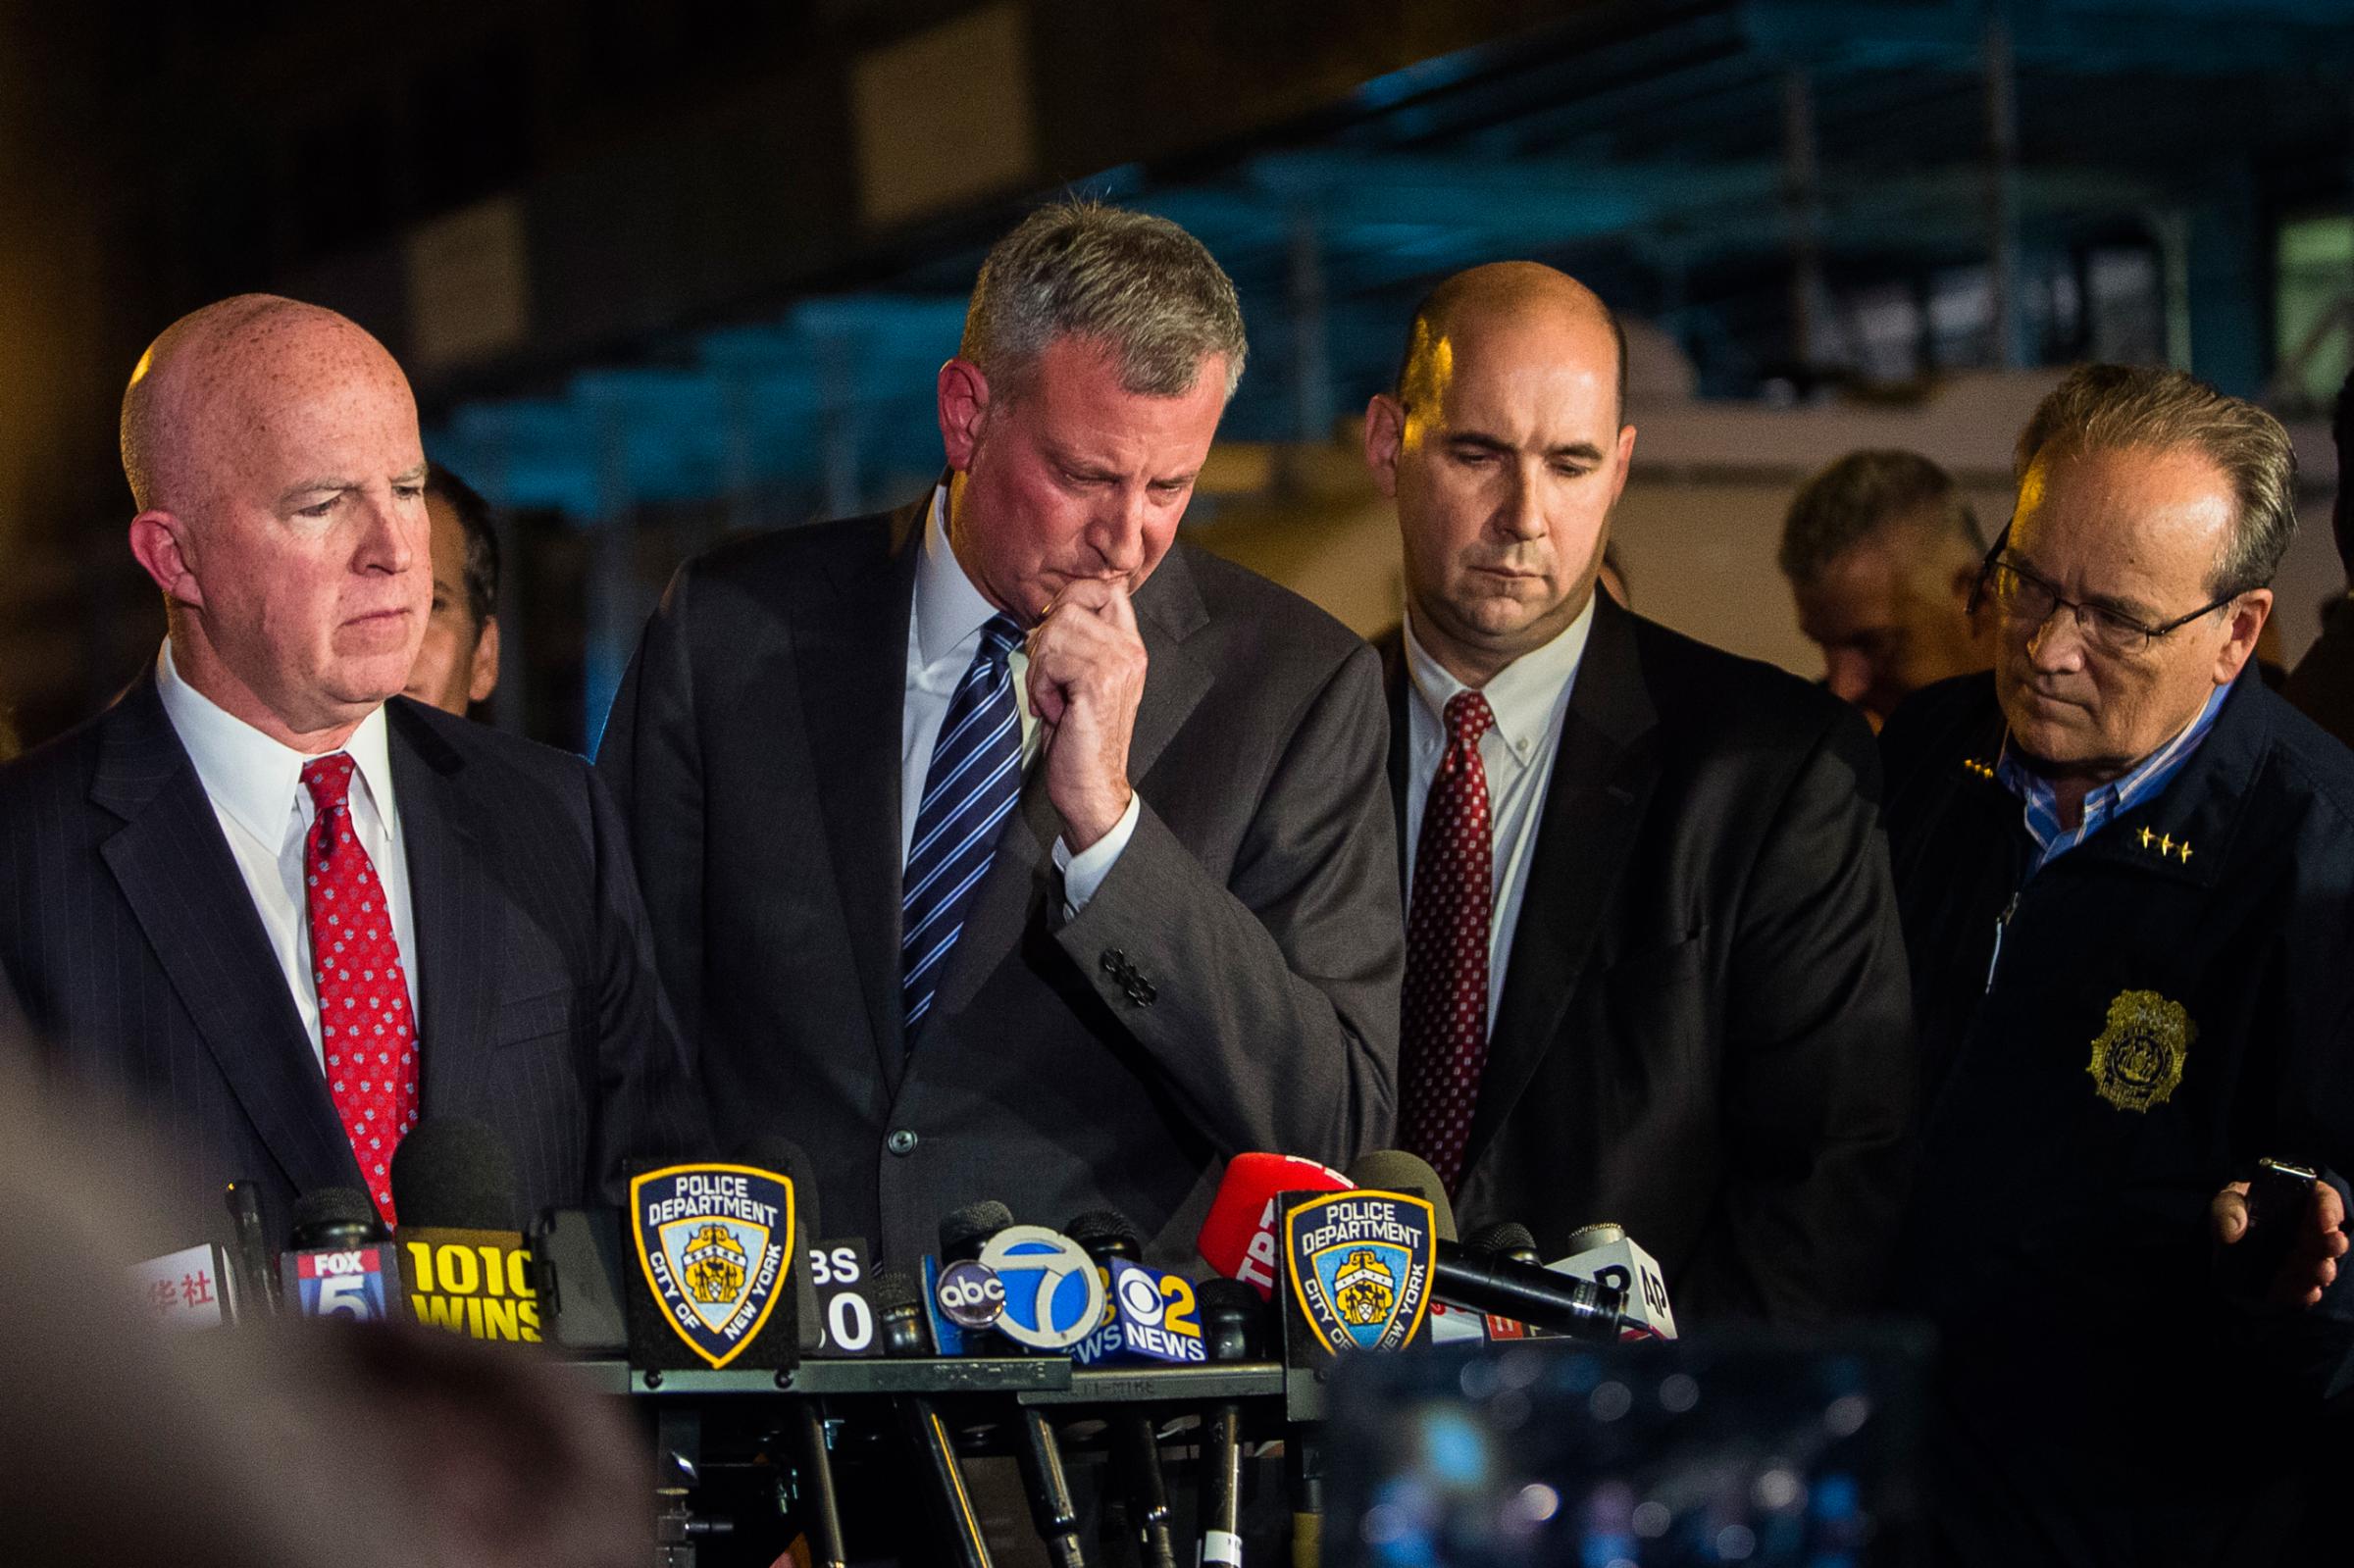 Mayor Bill de Blasio, center, and NYPD Chief of Department James O'Neill, left, react during a press conference near the scene of an explosion on West 23rd street in Manhattan's Chelsea neighborhood, in New York, Saturday, Sept. 17, 2016. Authorities say more than two dozen people were injured in the explosion Saturday night. (AP Photo/Andres Kudacki)